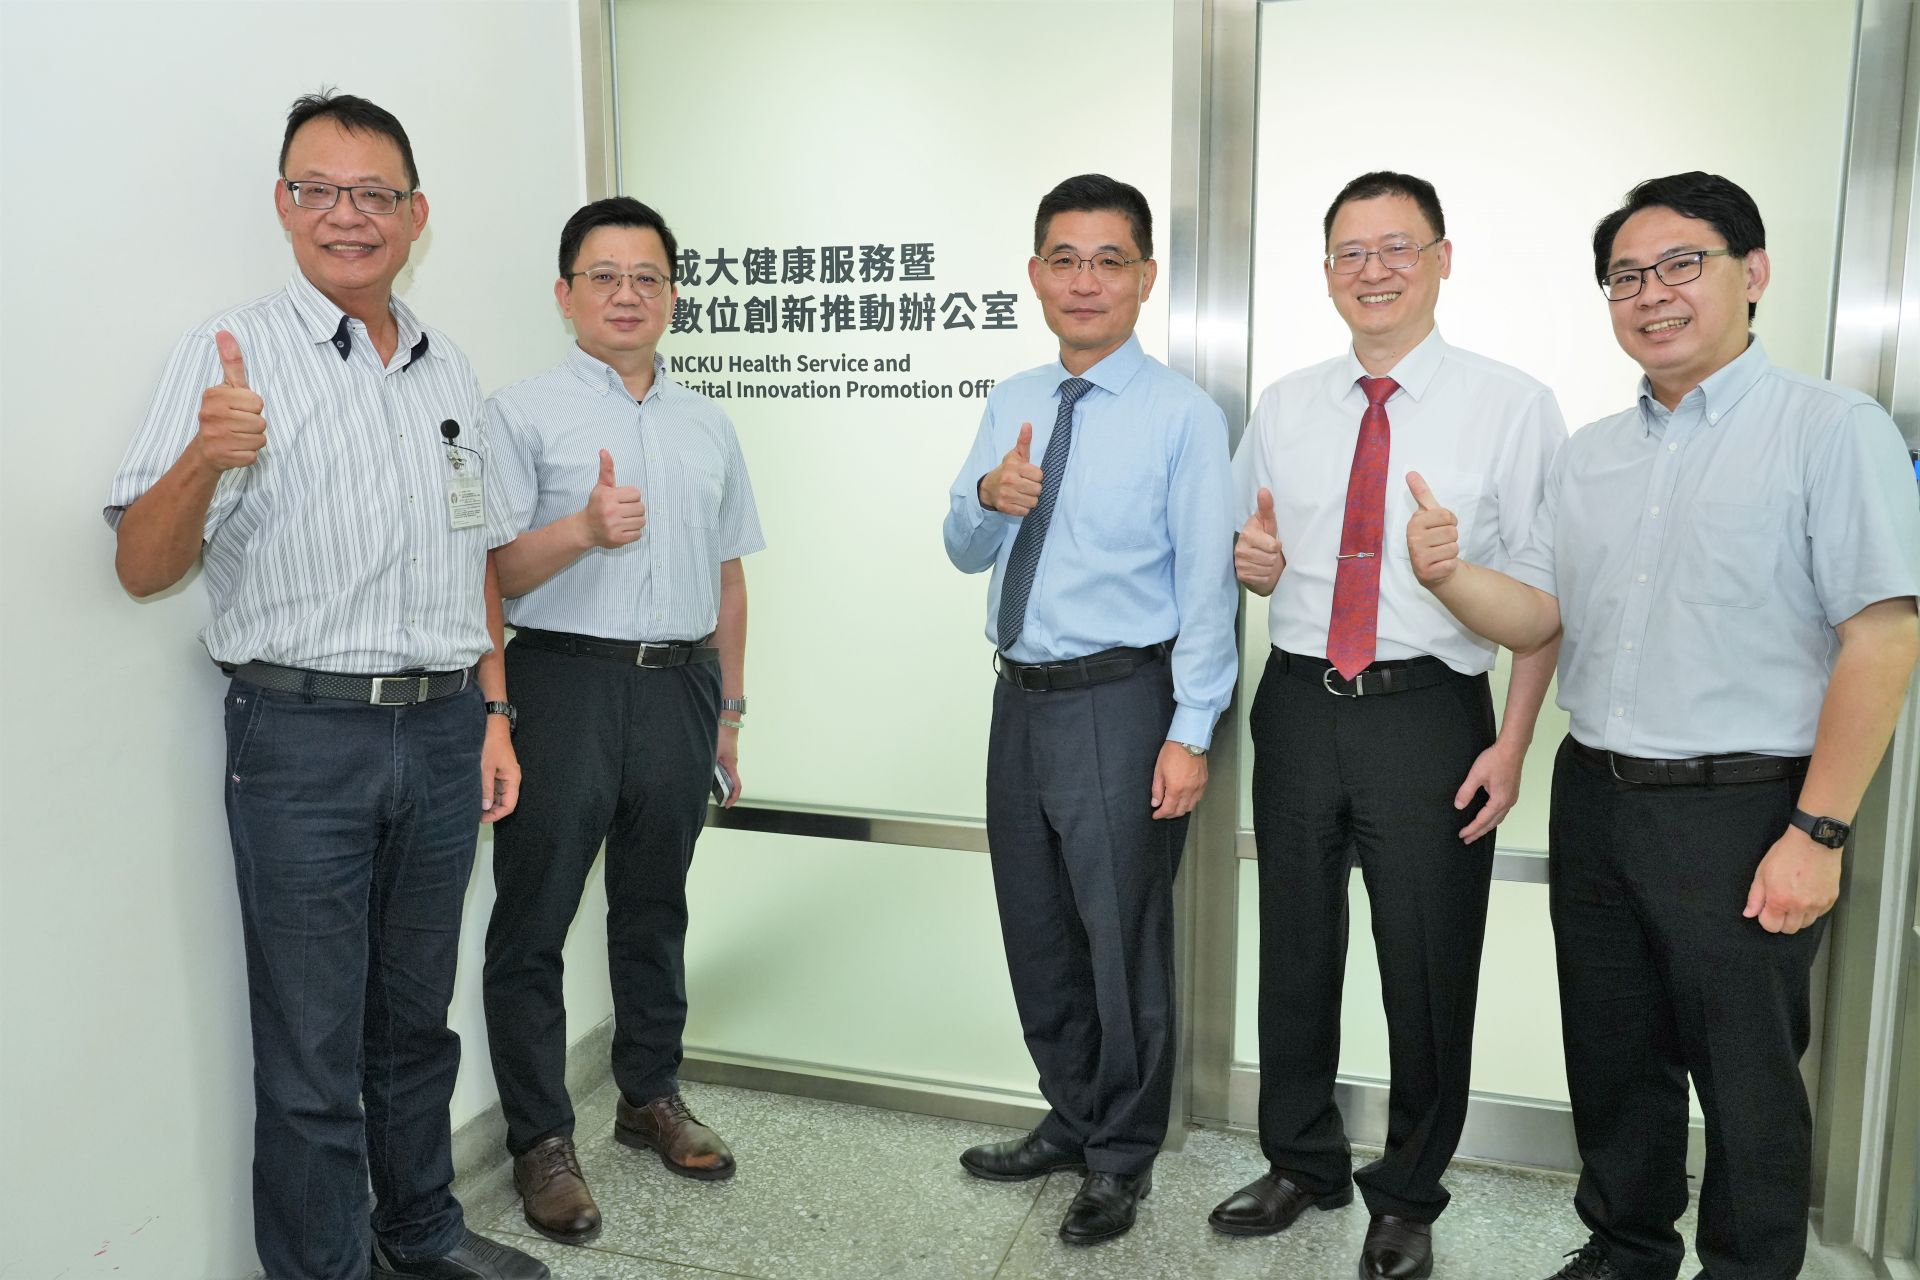 NCKU Launches Digital Sustainability Innovation Hub to Establish a Global Model for Smart Health Services in the Future.